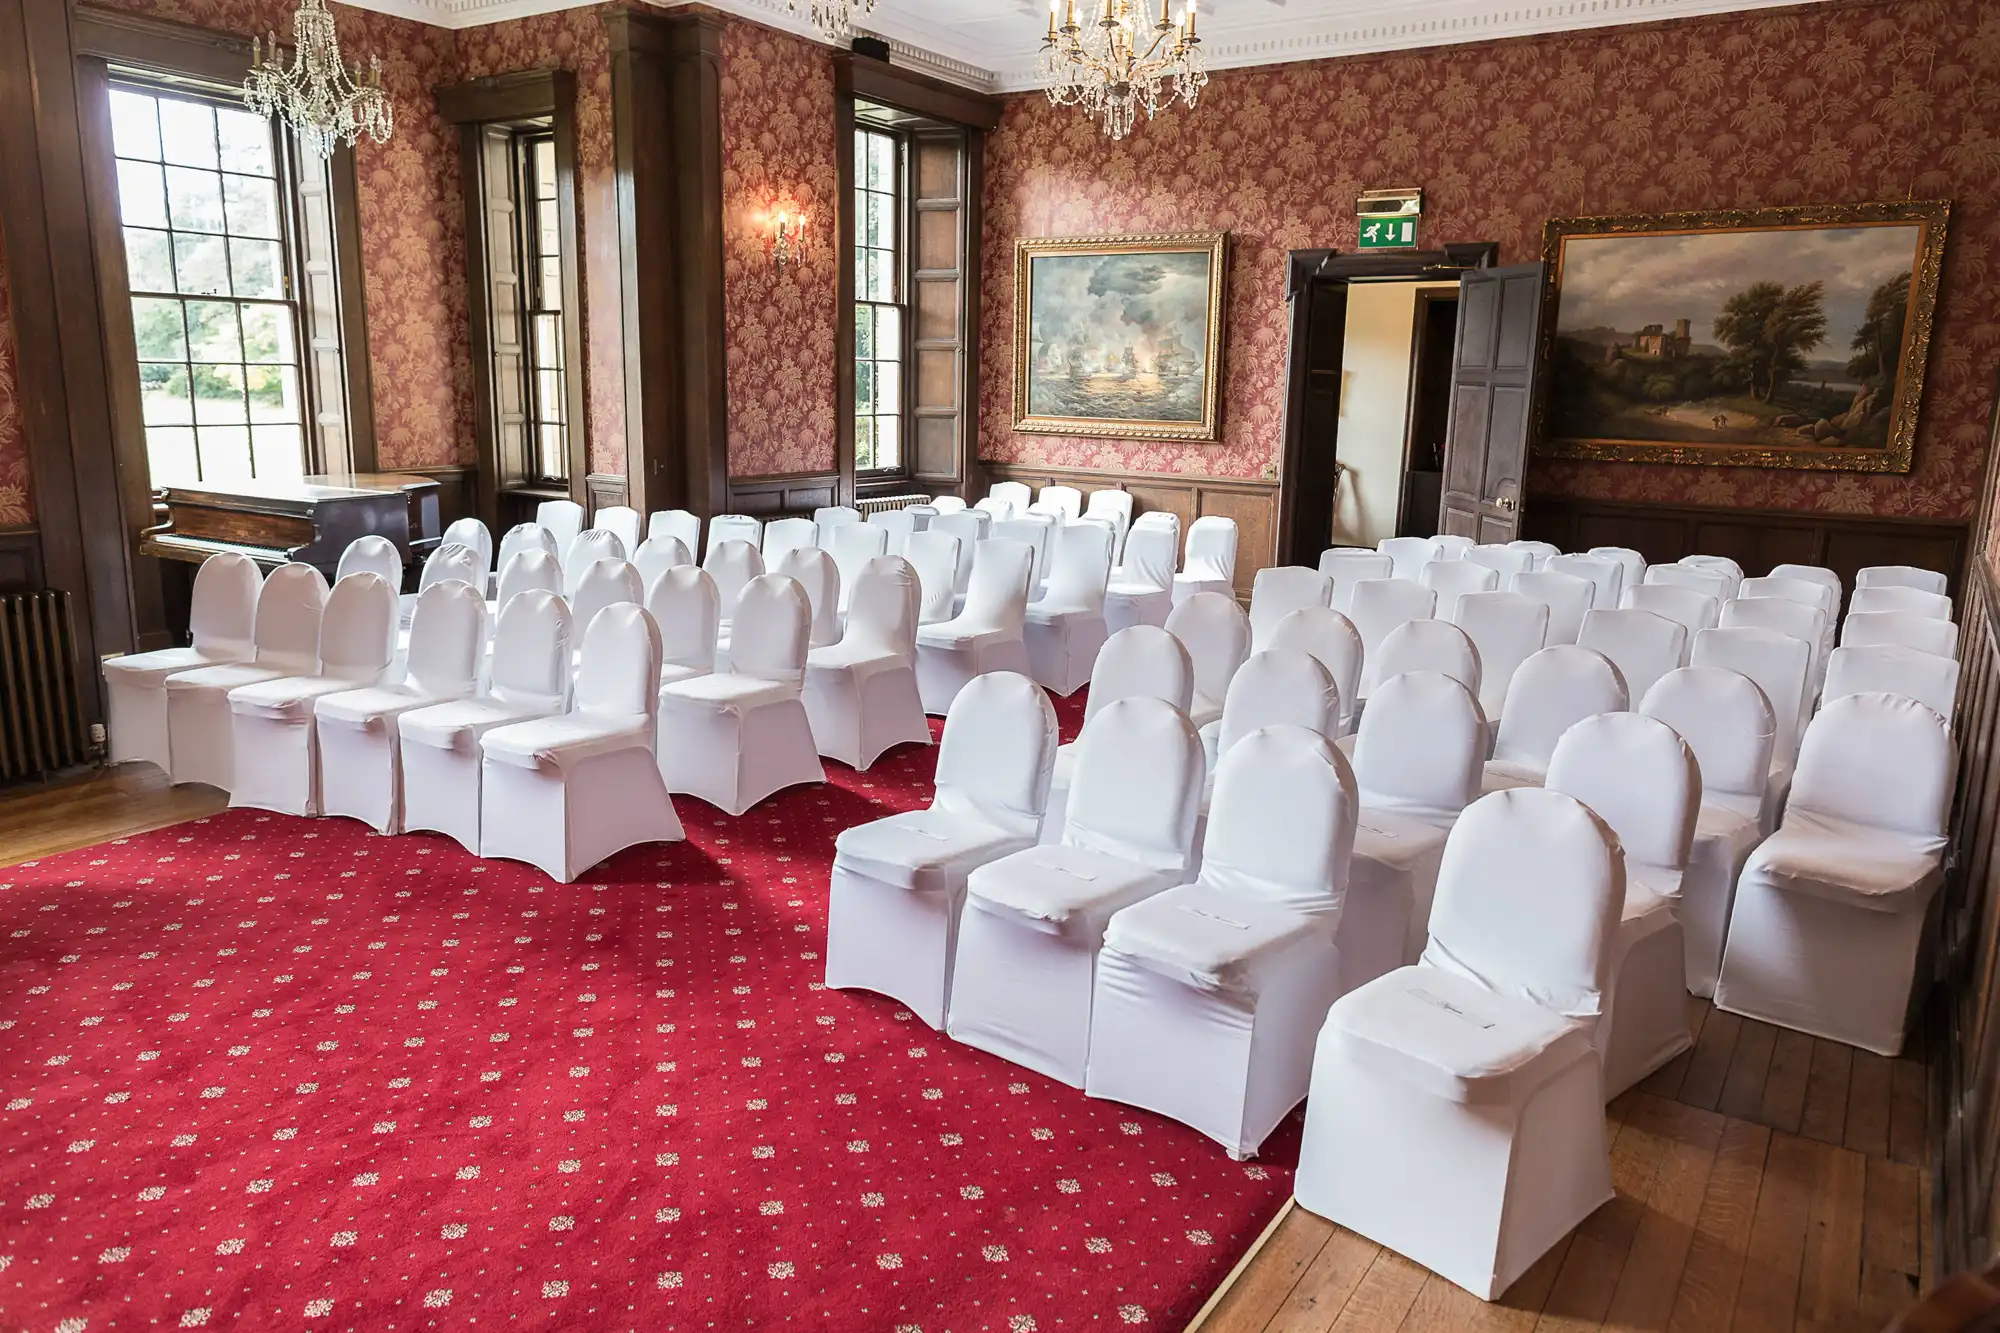 Elegant event room with rows of white chairs arranged on a red carpet, large windows, and classic paintings on the walls.